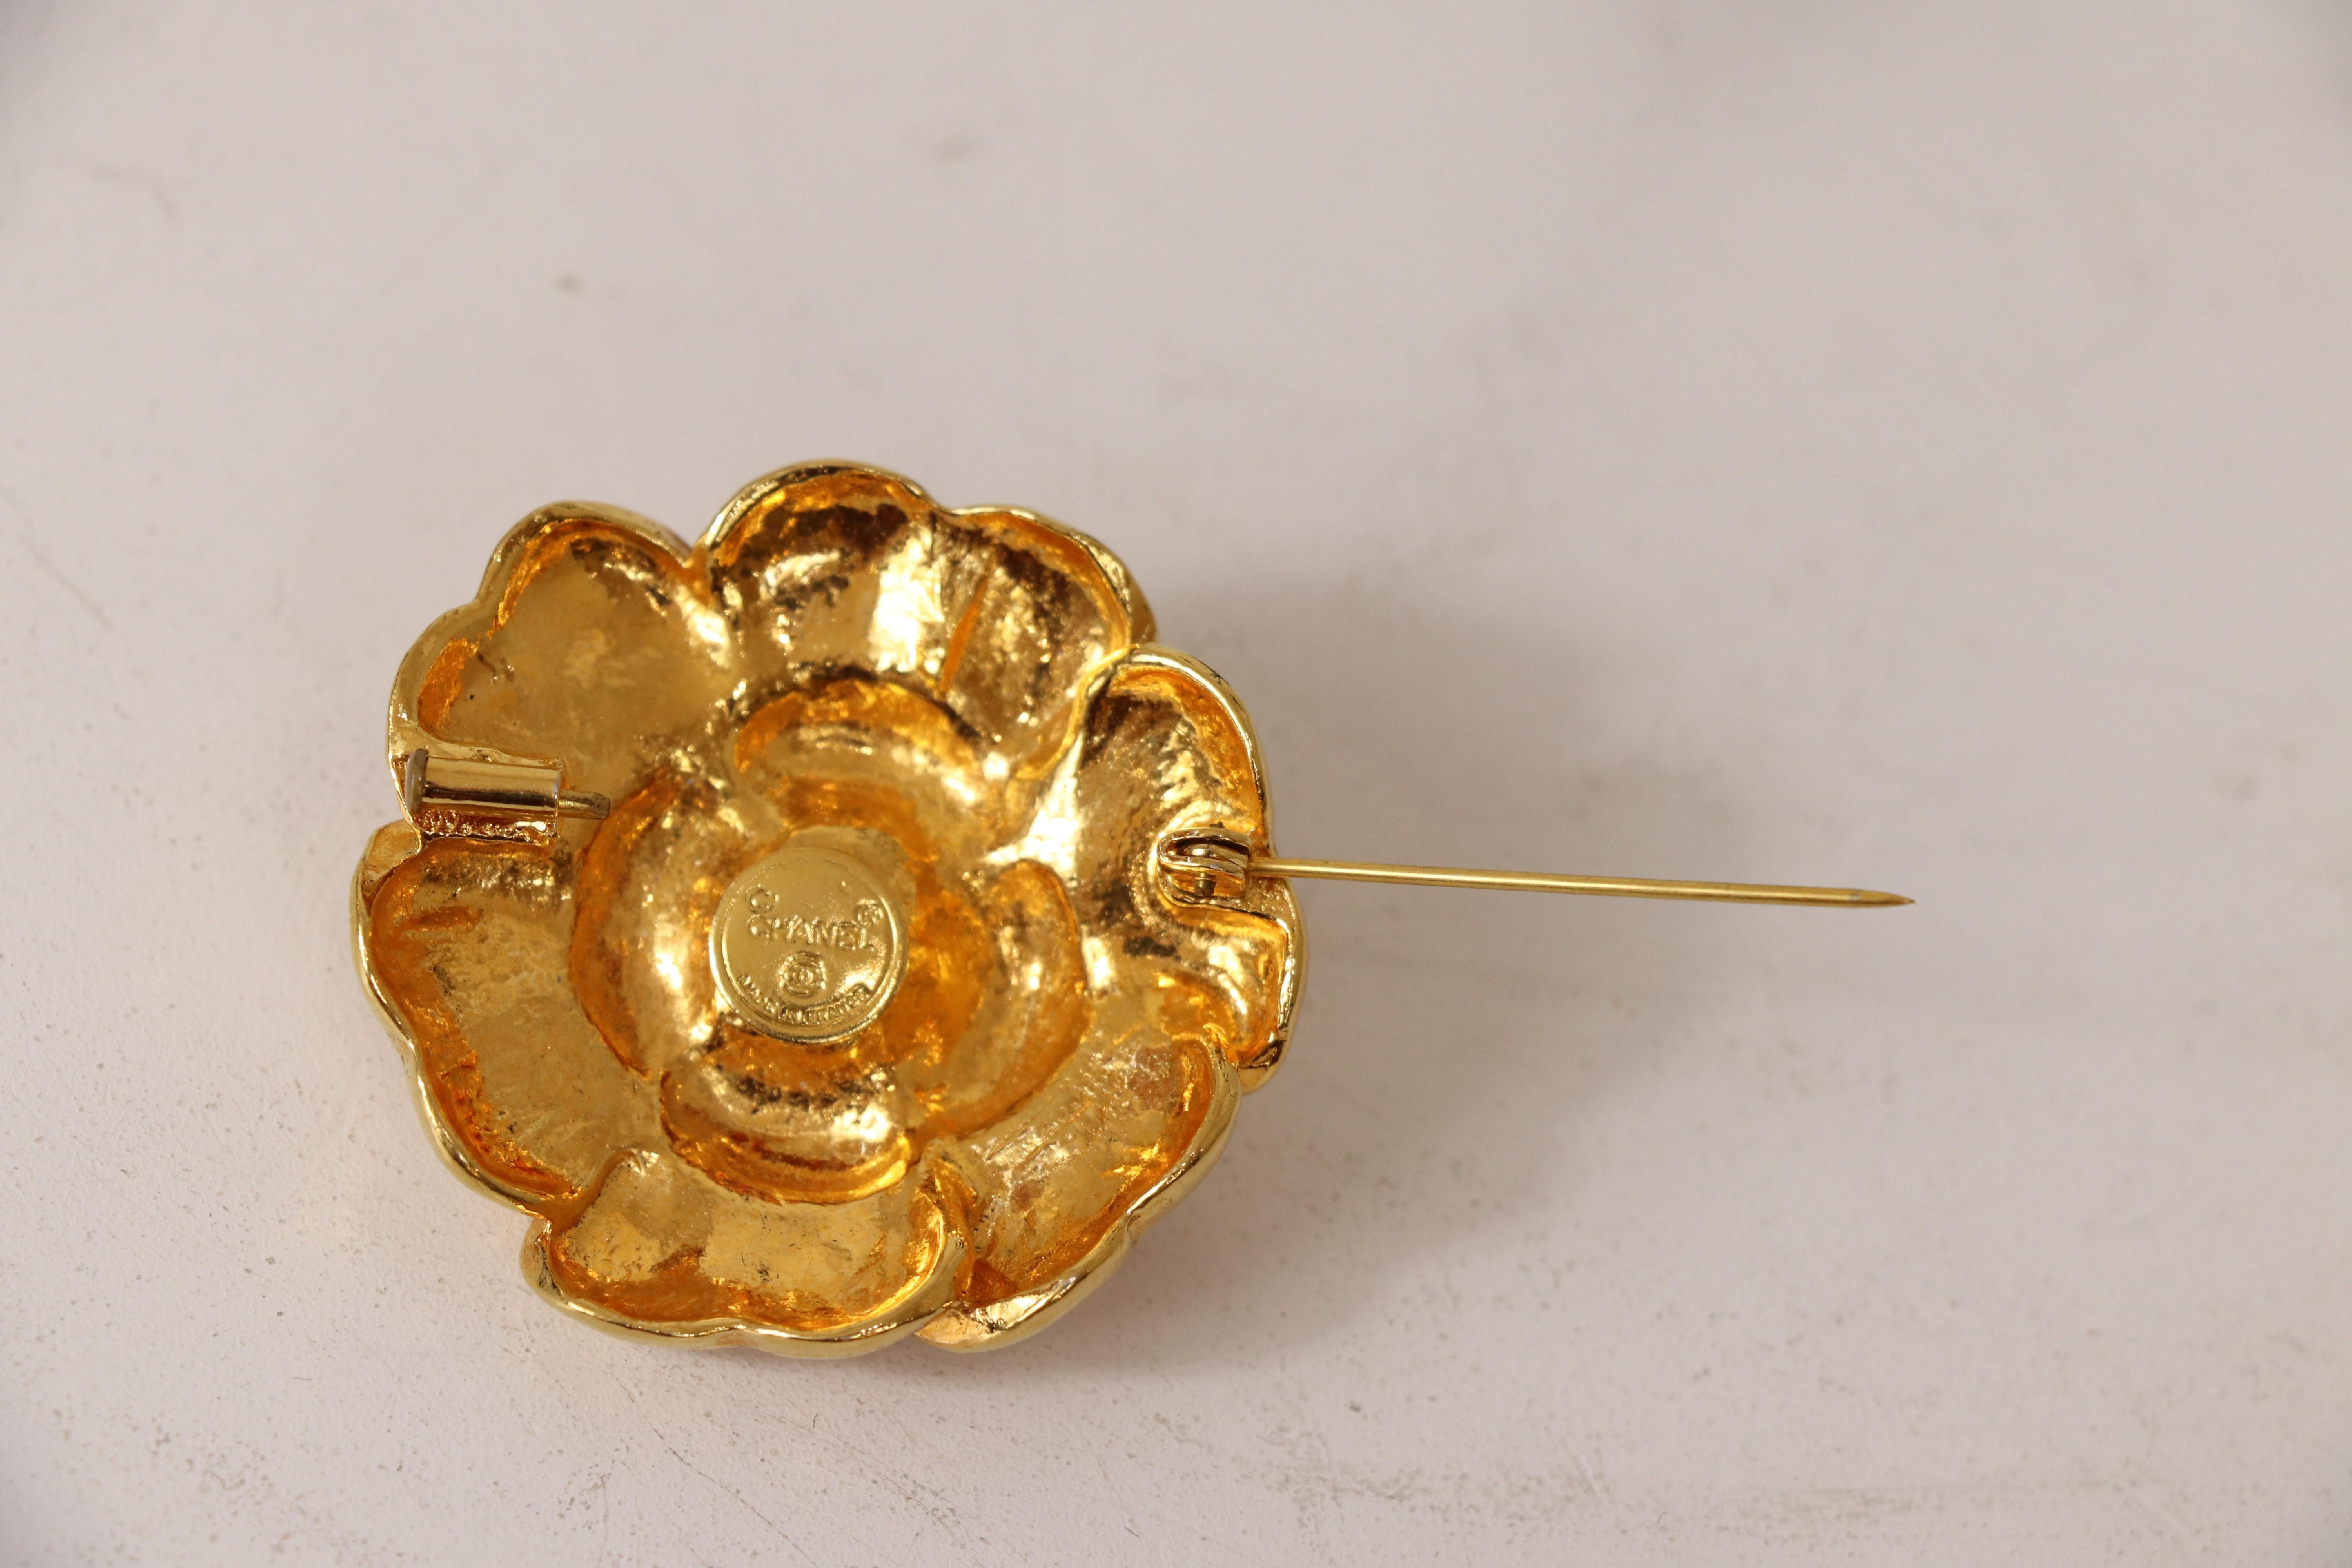 Contemporary Chanel Vintage 70's Era 24k Gold Plated Camellia Brooch 